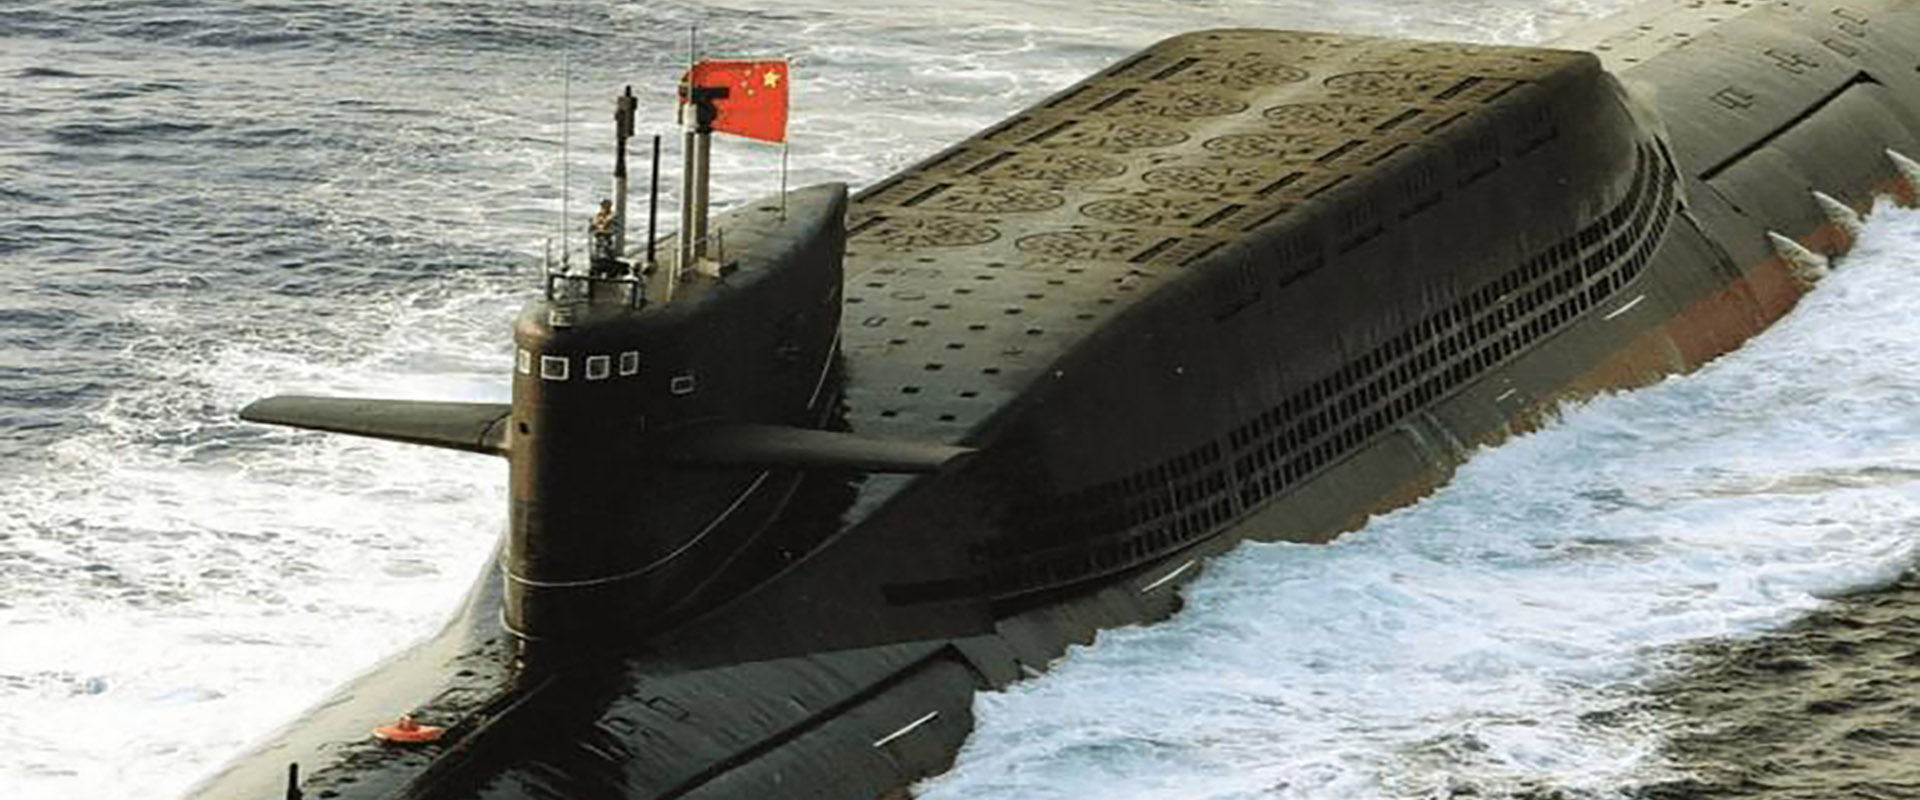 Lithium Batteries May Soon Power 'World's Largest Fleet' of Submarines